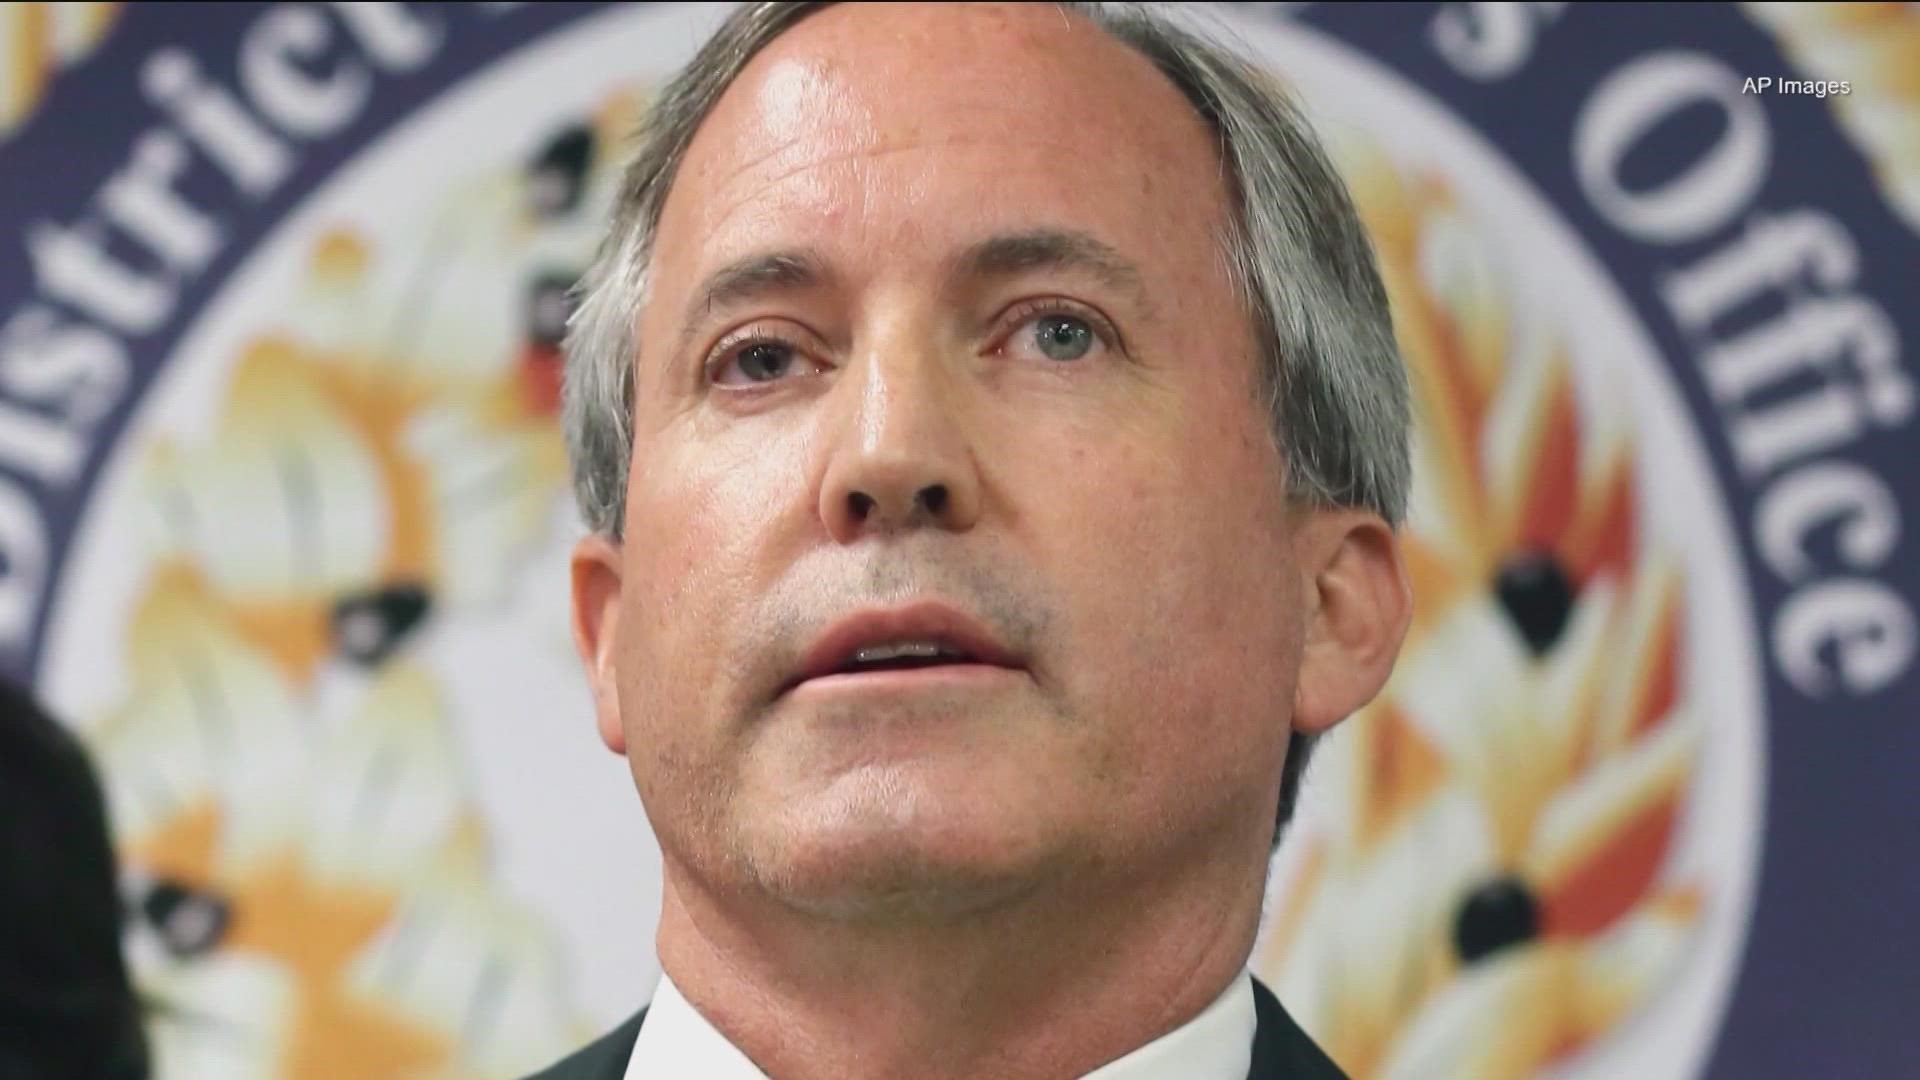 If the two companies refuse to make changes, Paxton and other state attorneys general are threatening legal action.